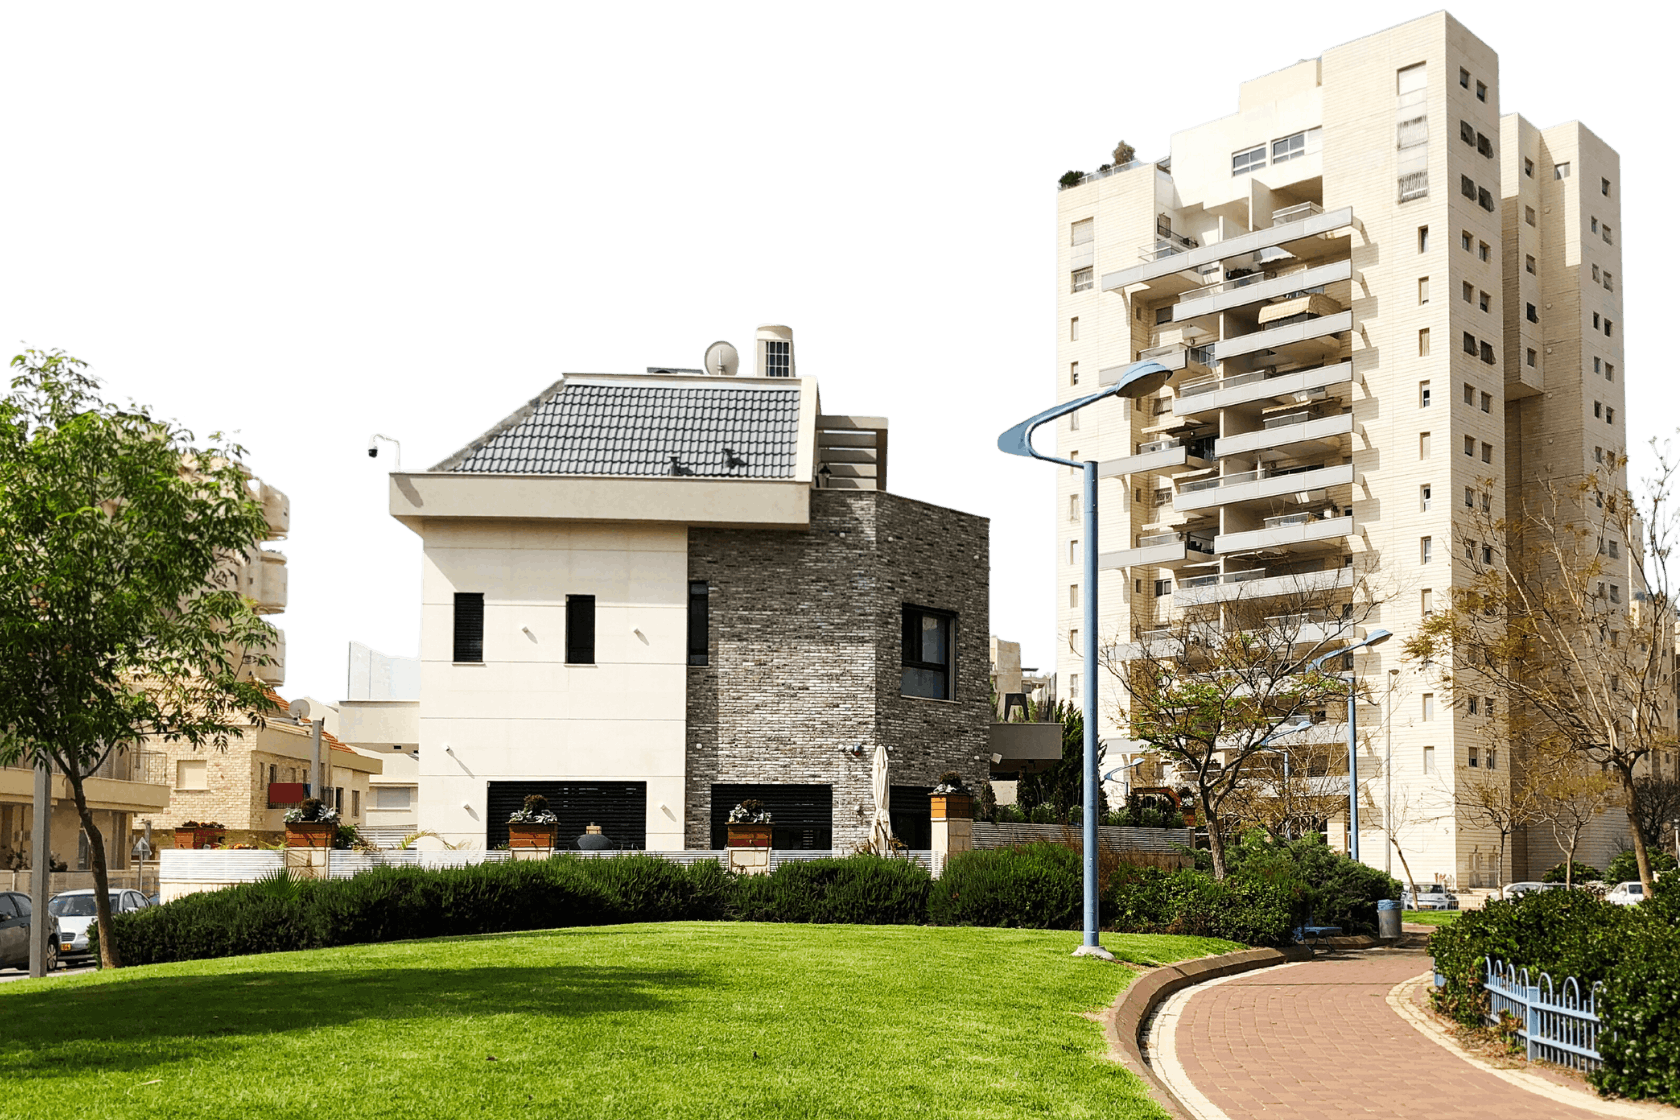 Using a Real Estate Agent in Israel: Advantages, Disadvantages, and Tips